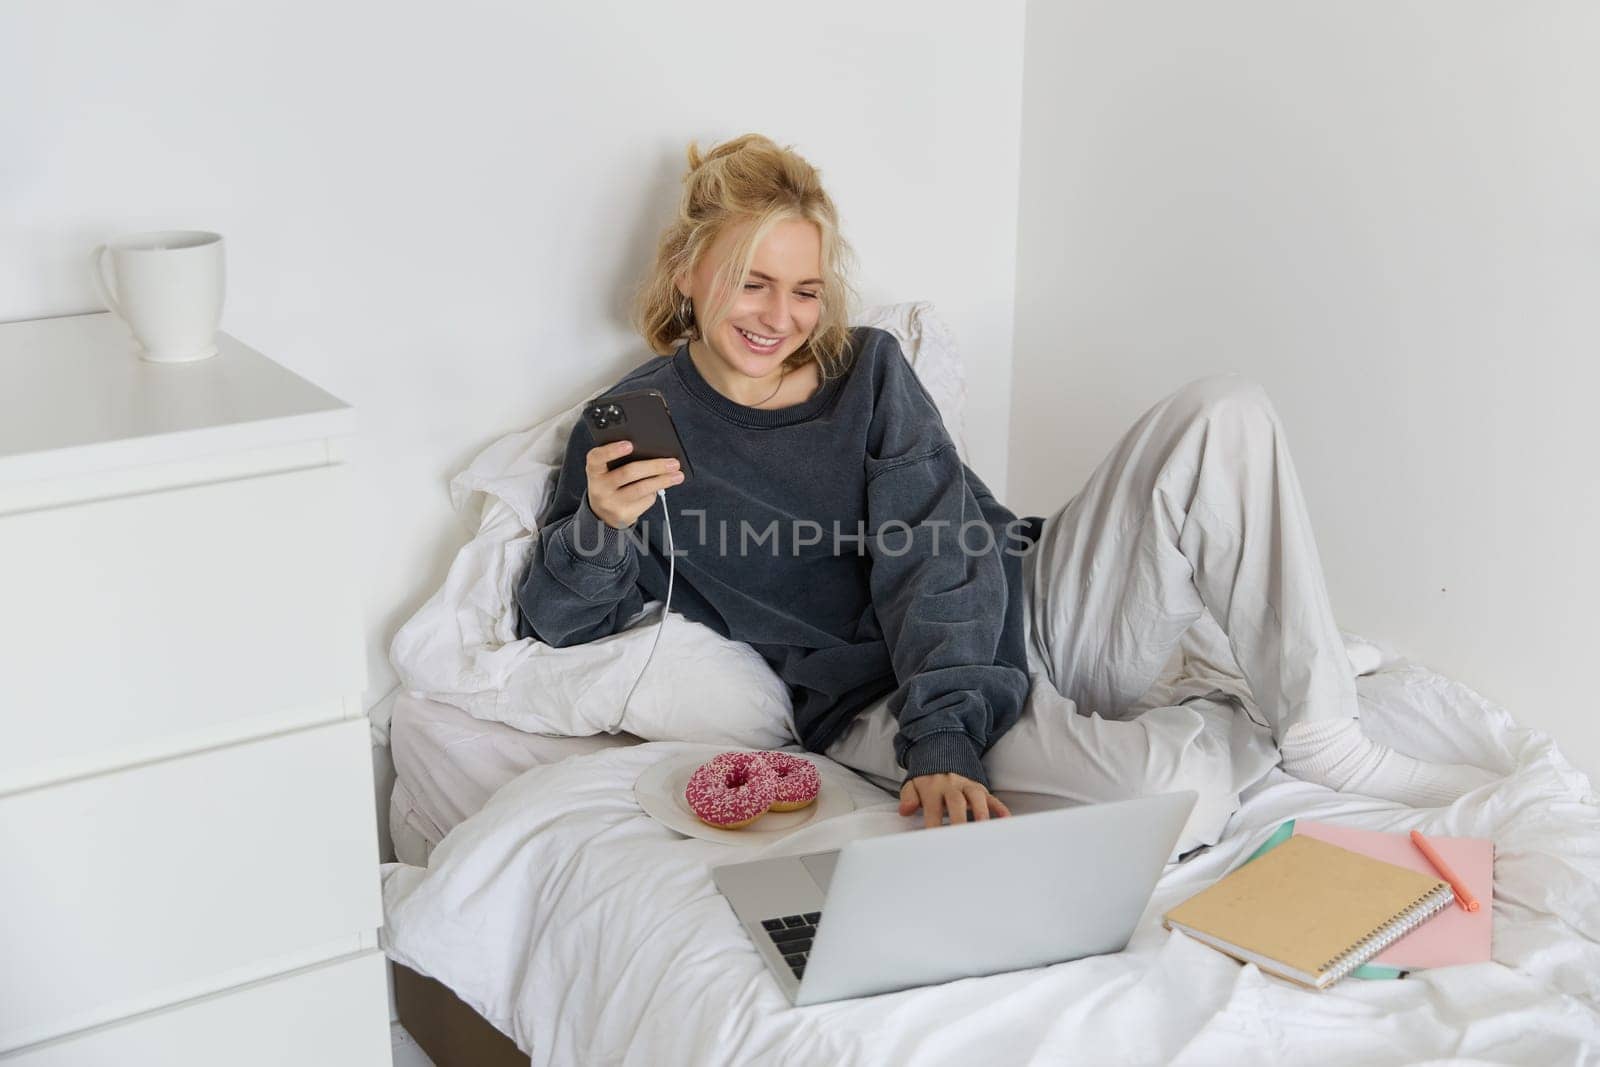 Lifestyle and people concept. Young beautiful woman, staying at home, lying in bed with laptop and smartphone, eating doughnut, enjoying free time, spending weekend at home, watching movie online.